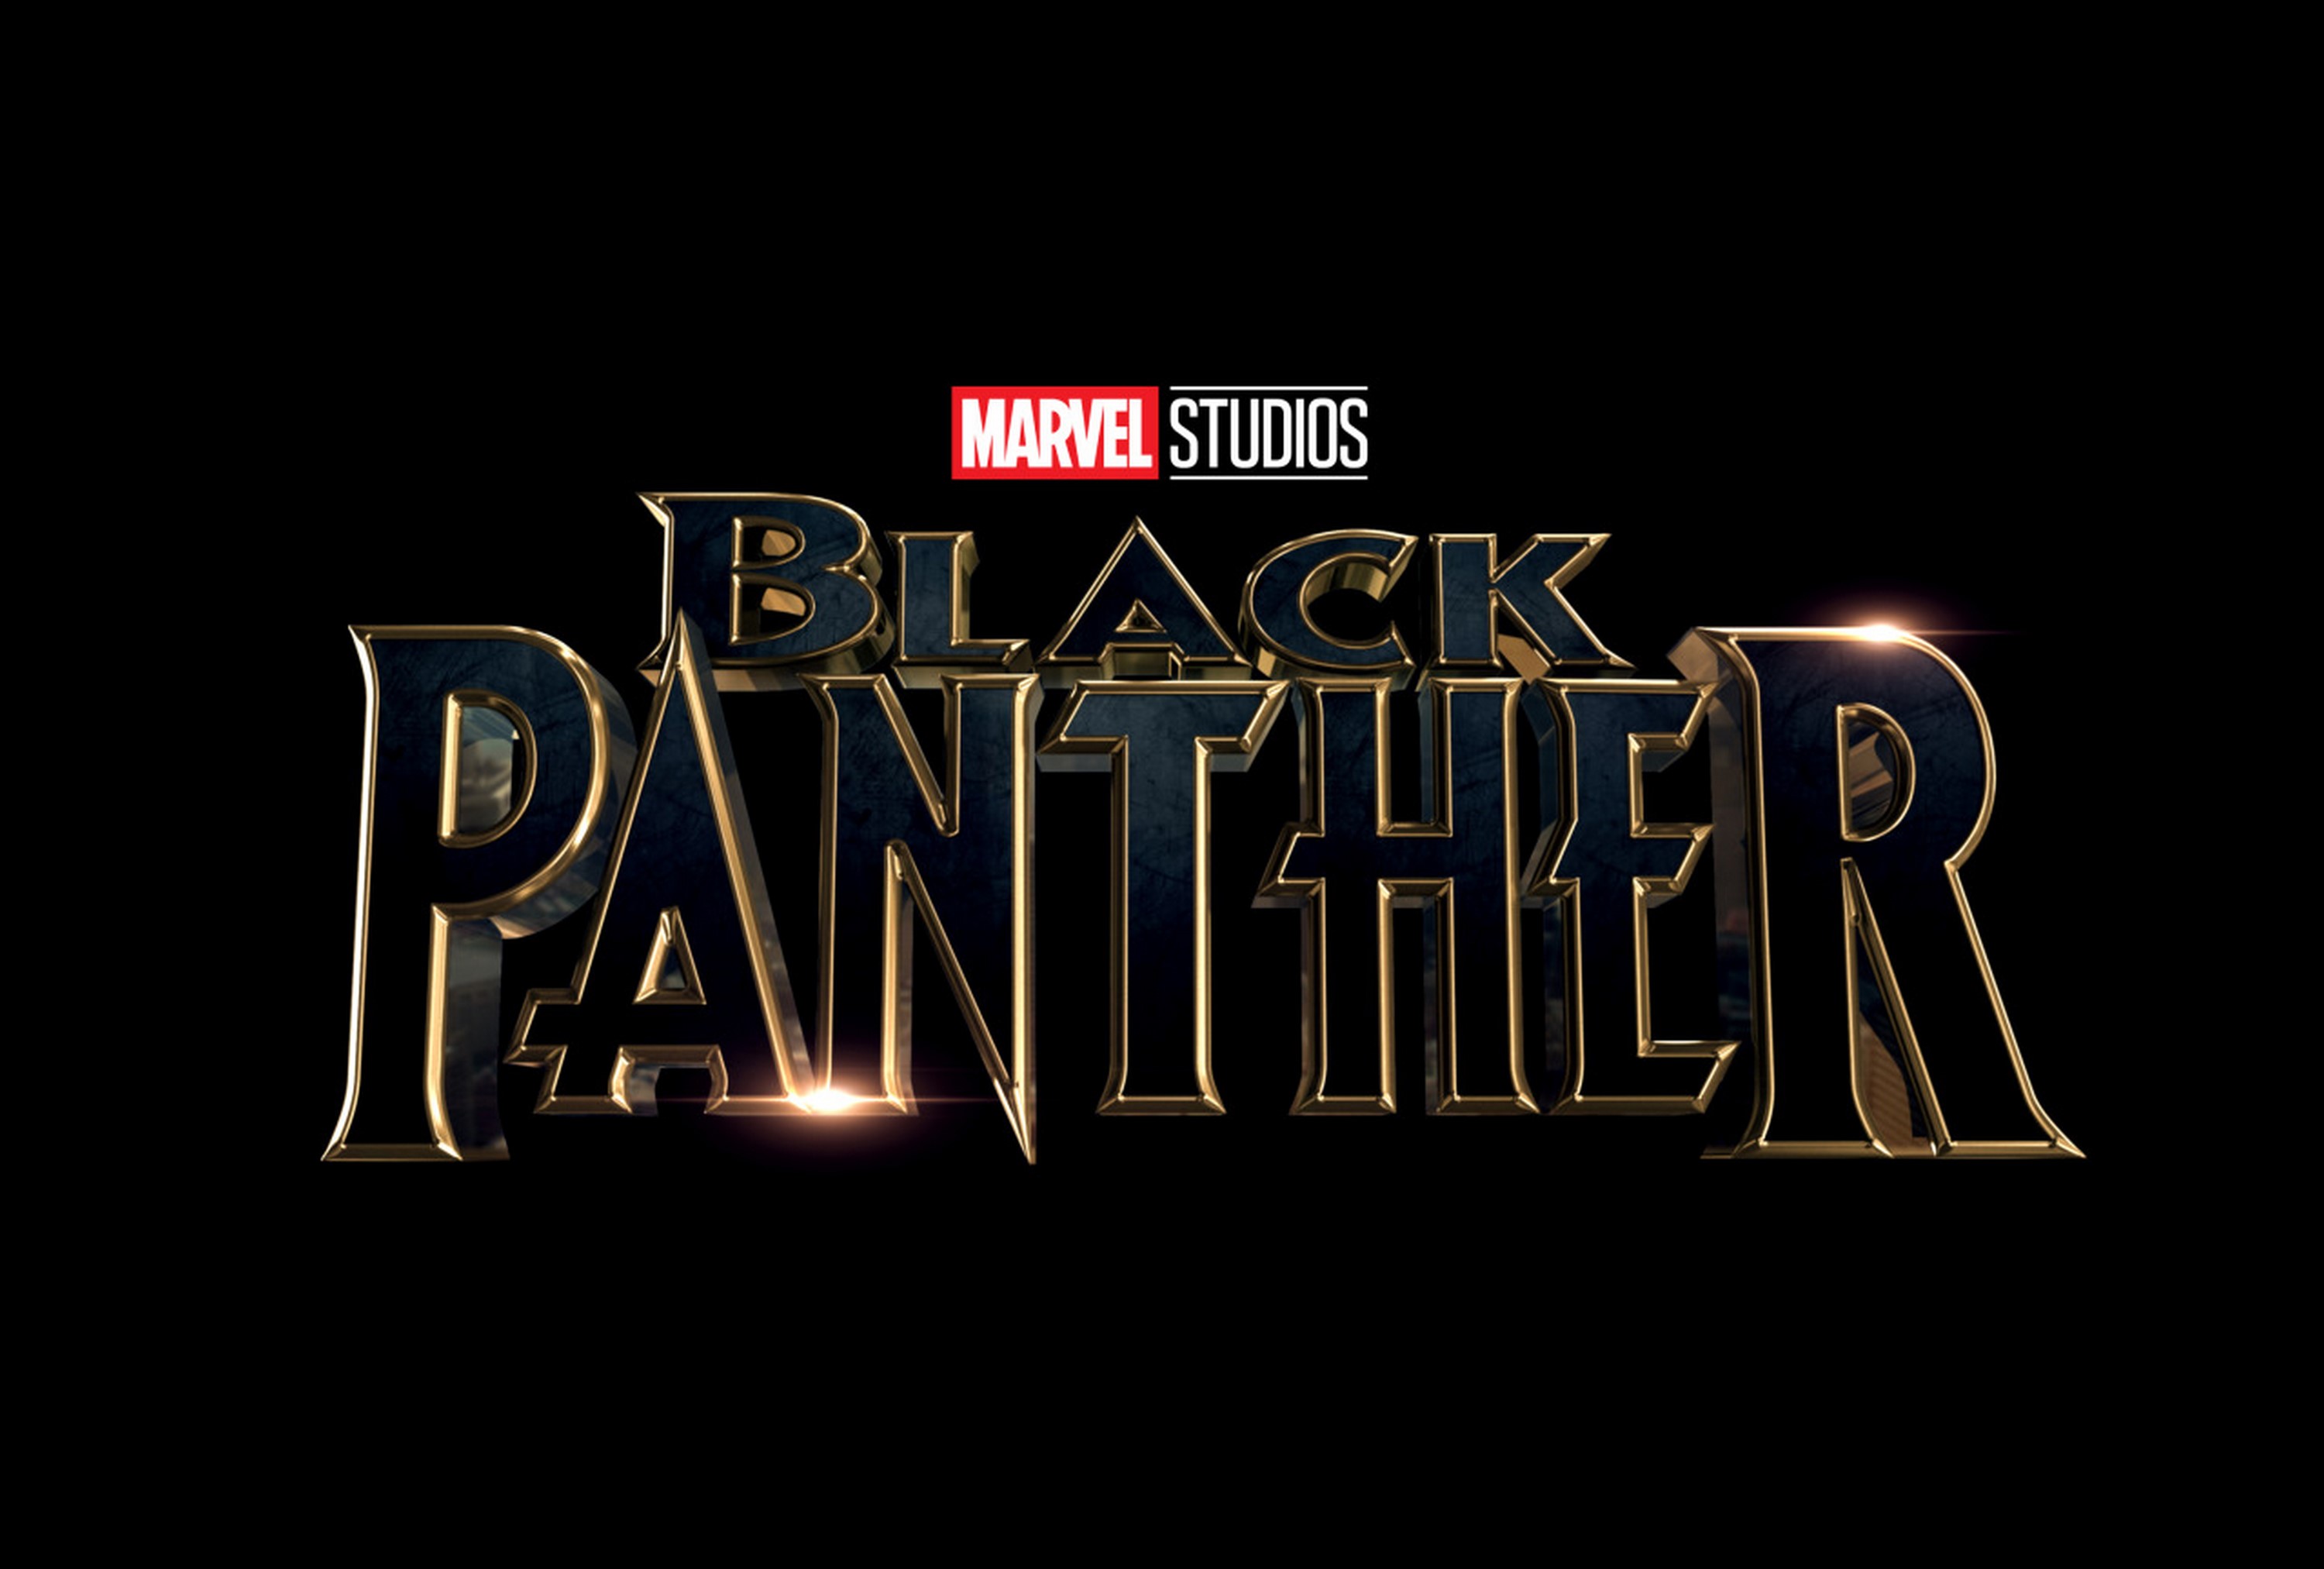 ‘Black Panther’ Teaser Gets 89 Million Views in 24 Hours